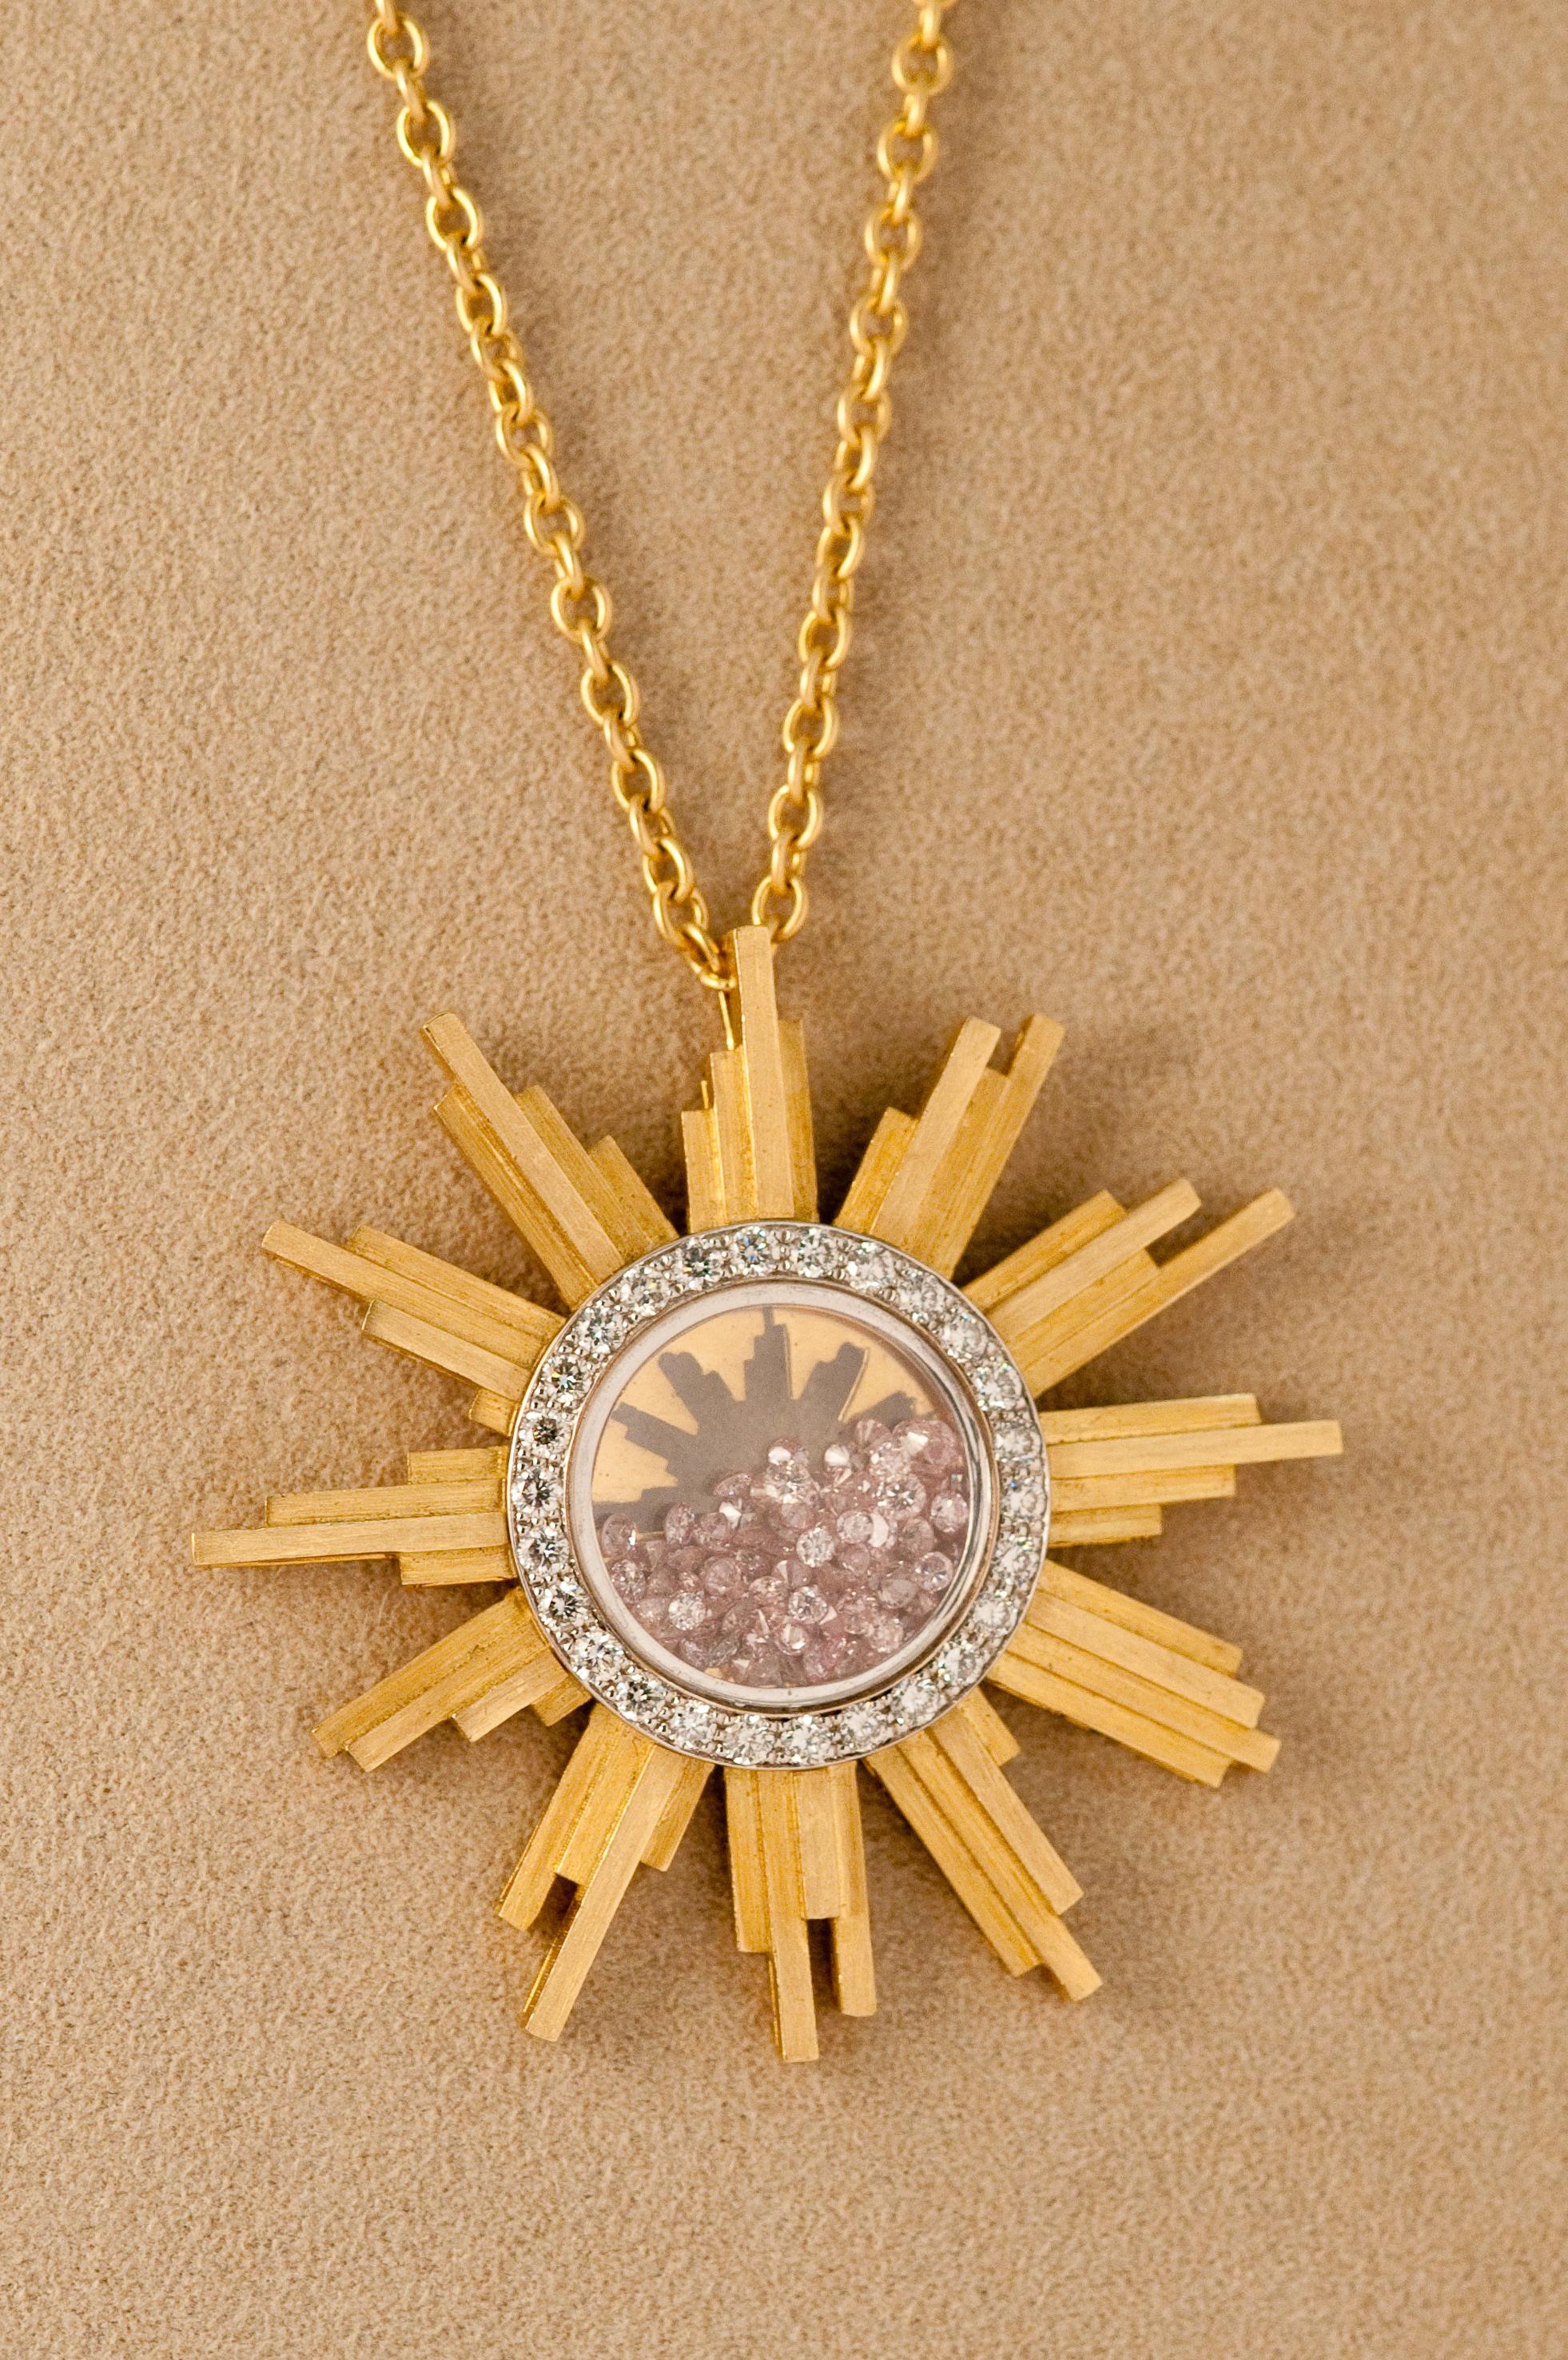 Artist Necklace, Yellow Gold Sun 34 Grams, Diamonds White and Pink 2.27 Carat, Unique